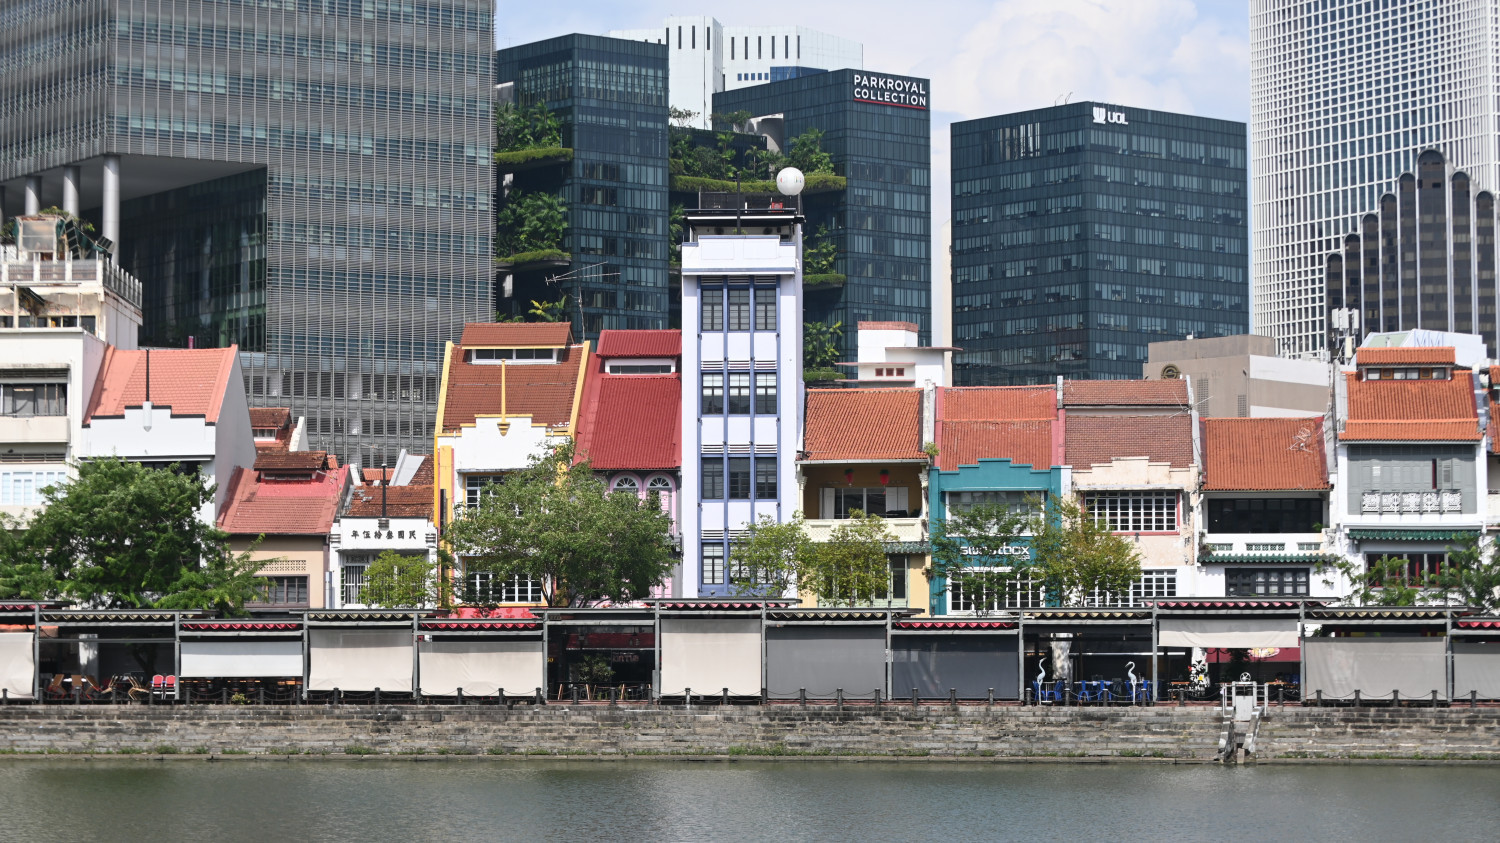 999-year leasehold six-storey shophouse in Boat Quay up for sale at $45 mil - Property News